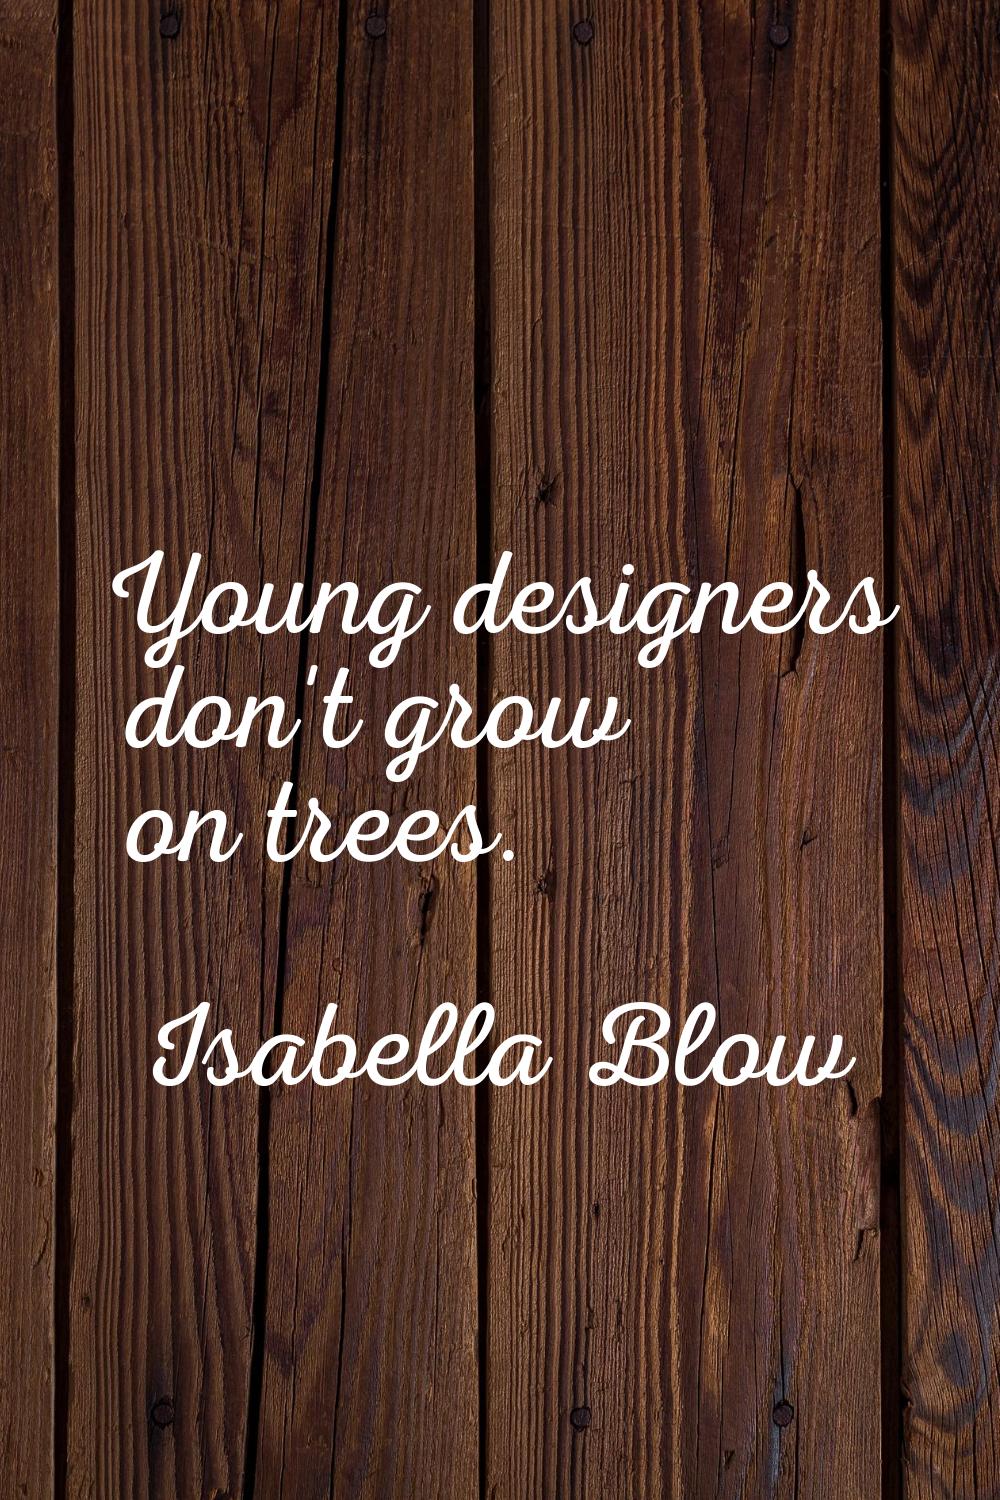 Young designers don't grow on trees.